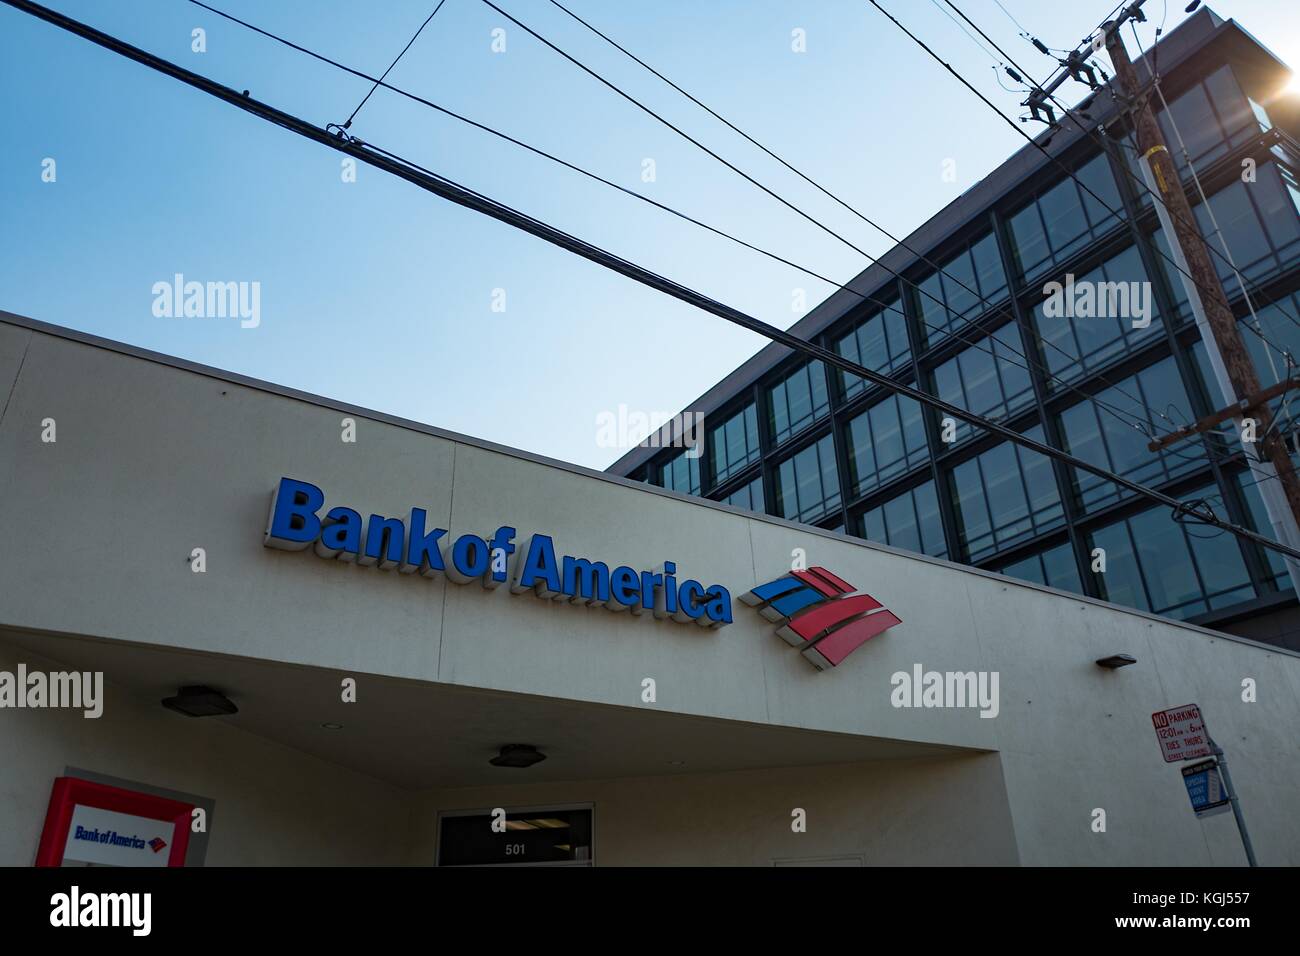 Sign on facade of the Bank of America branch in the South of Market (SoMa) neighborhood of San Francisco, California, October 13, 2017. SoMa is known for having one of the highest concentrations of technology companies and startups of any region worldwide. () Stock Photo